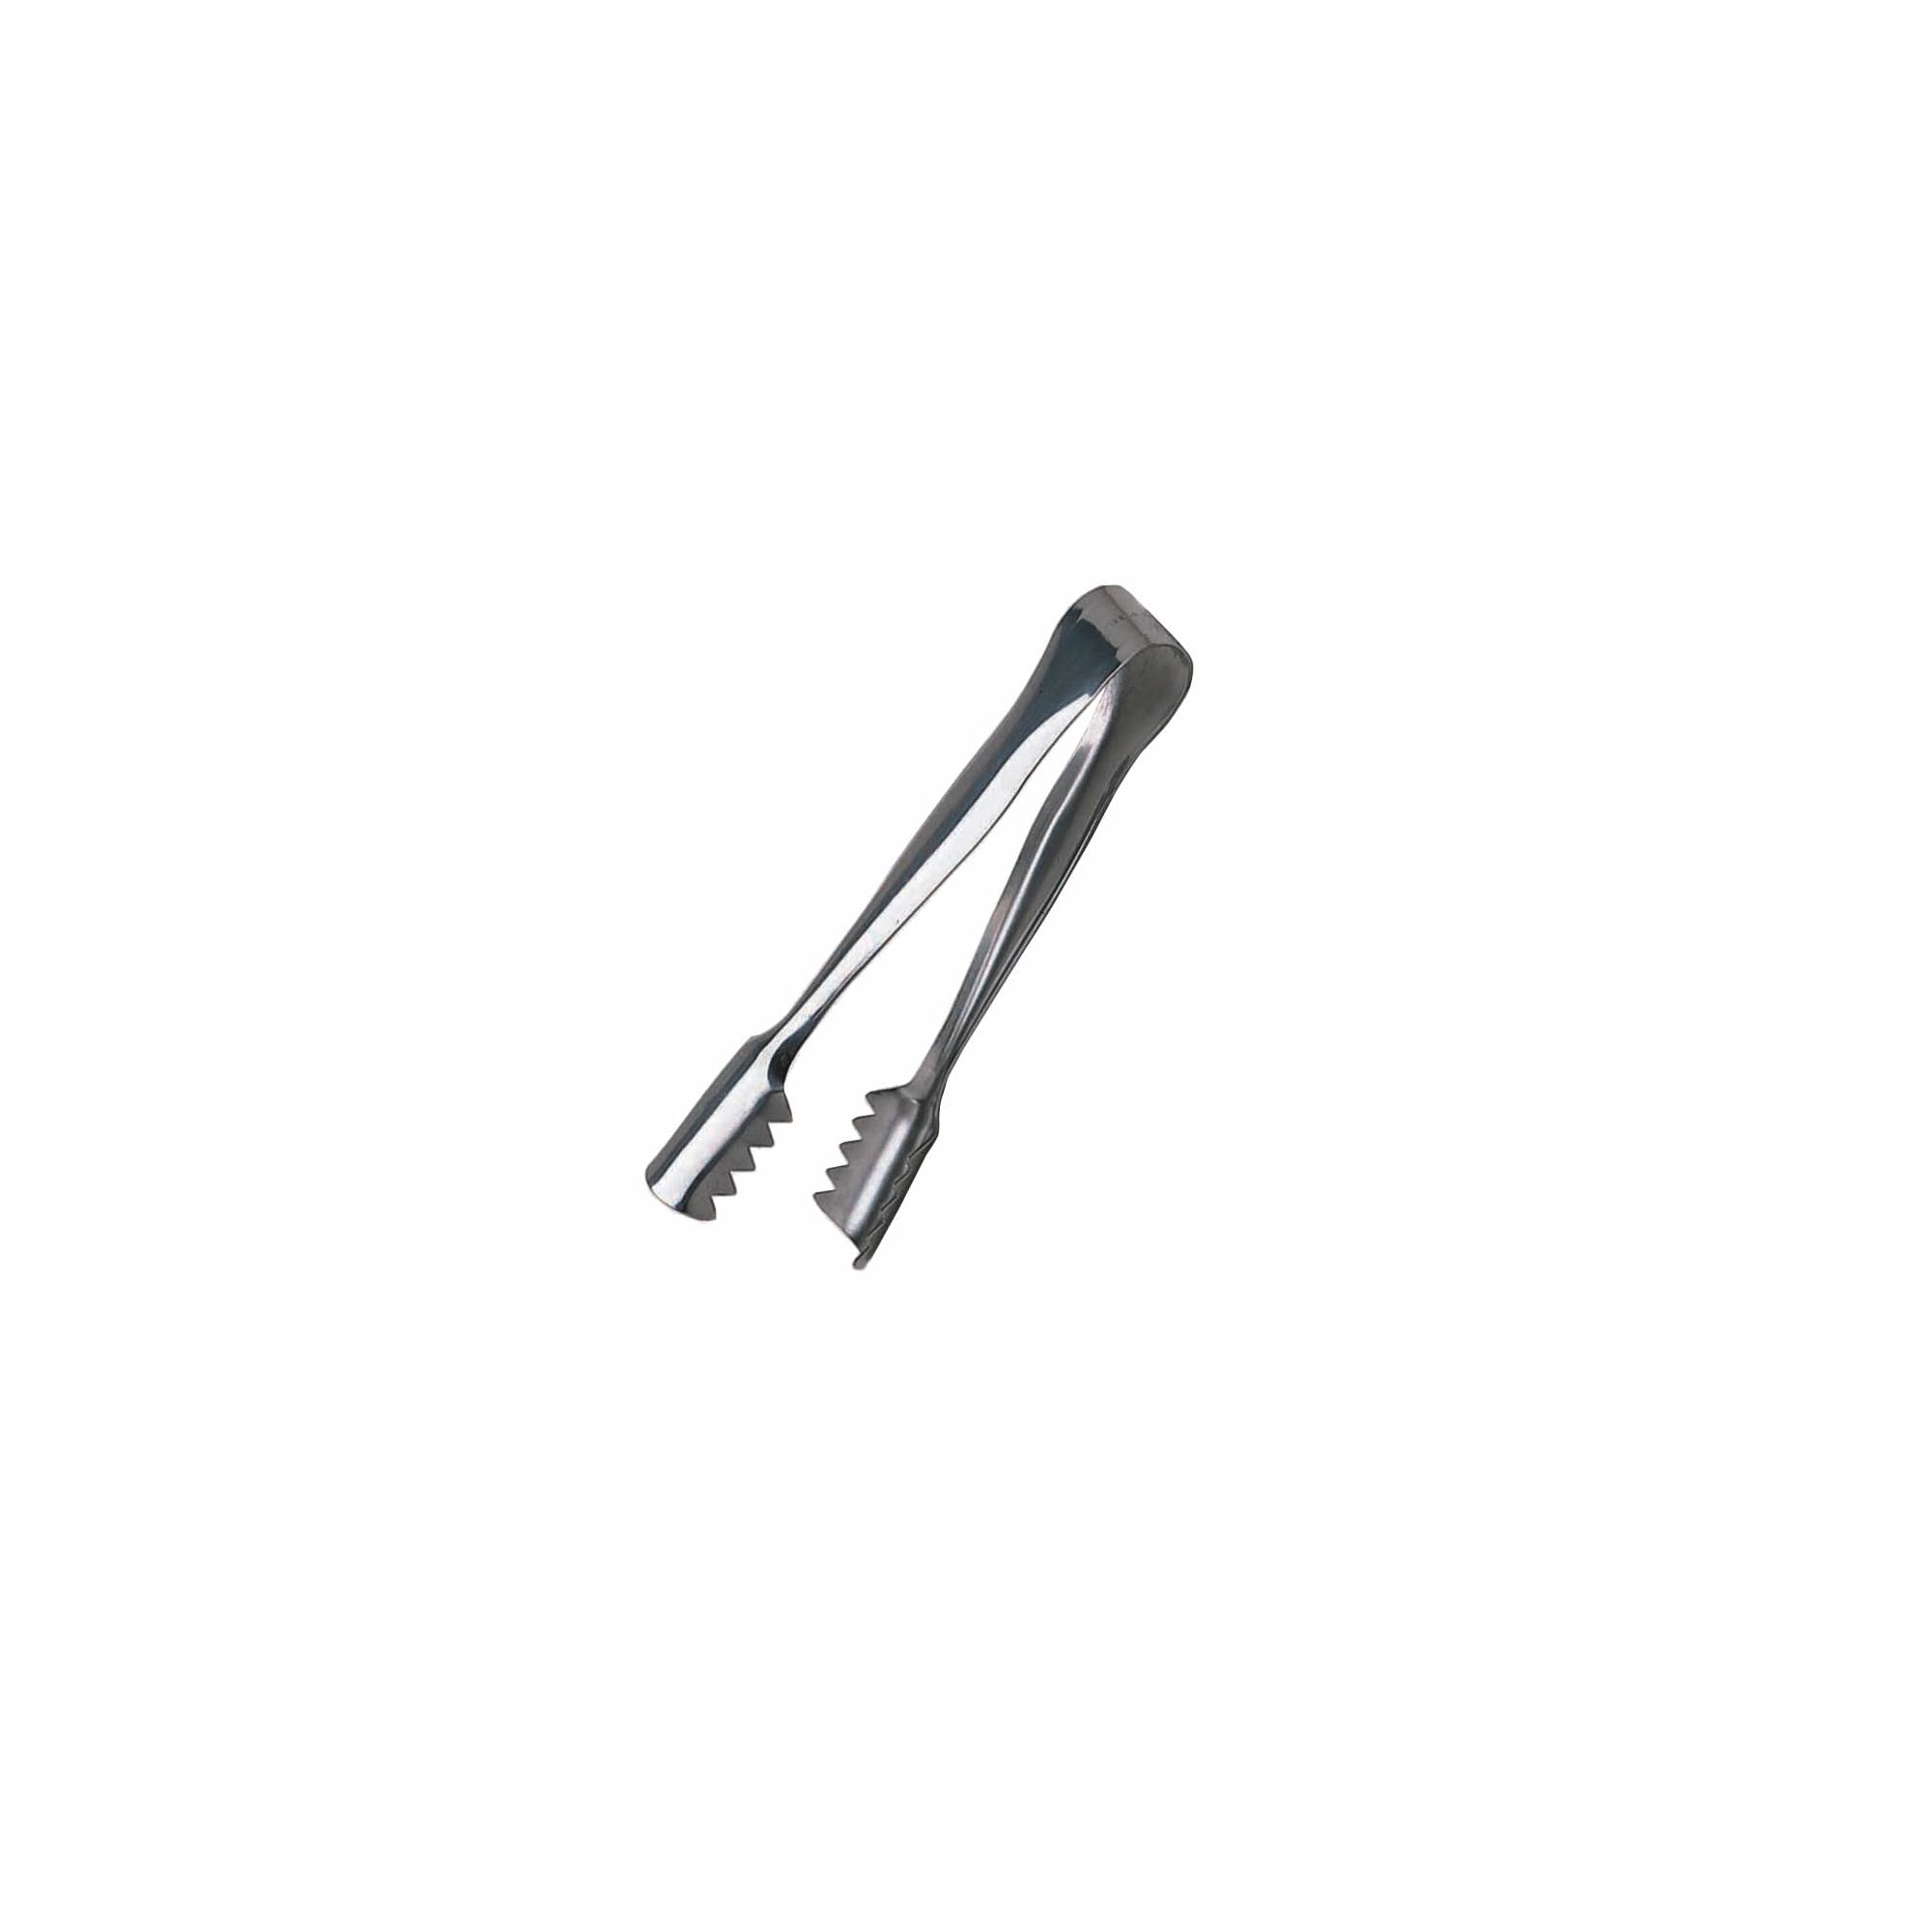 BarCraft Stainless Steel Ice Serving Tongs - The Cooks Cupboard Ltd